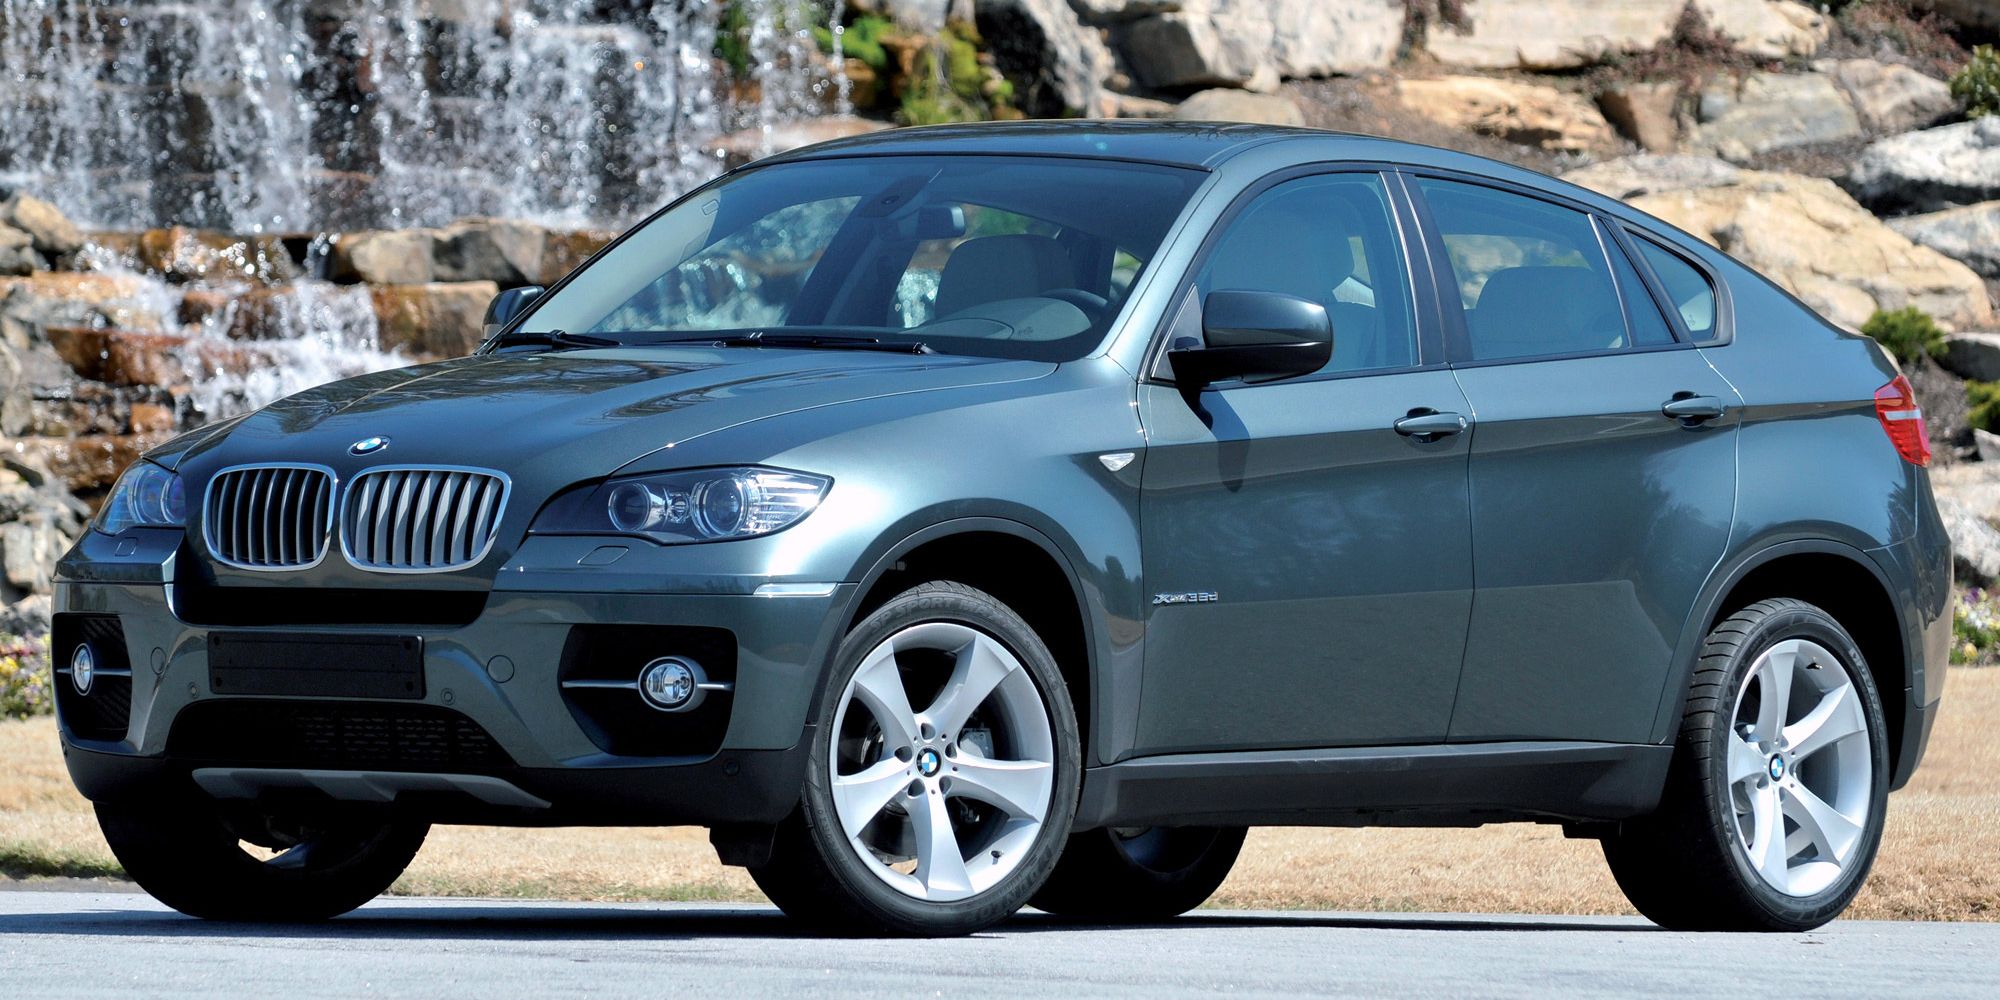 Front 3/4 view of the first generation BMW X6